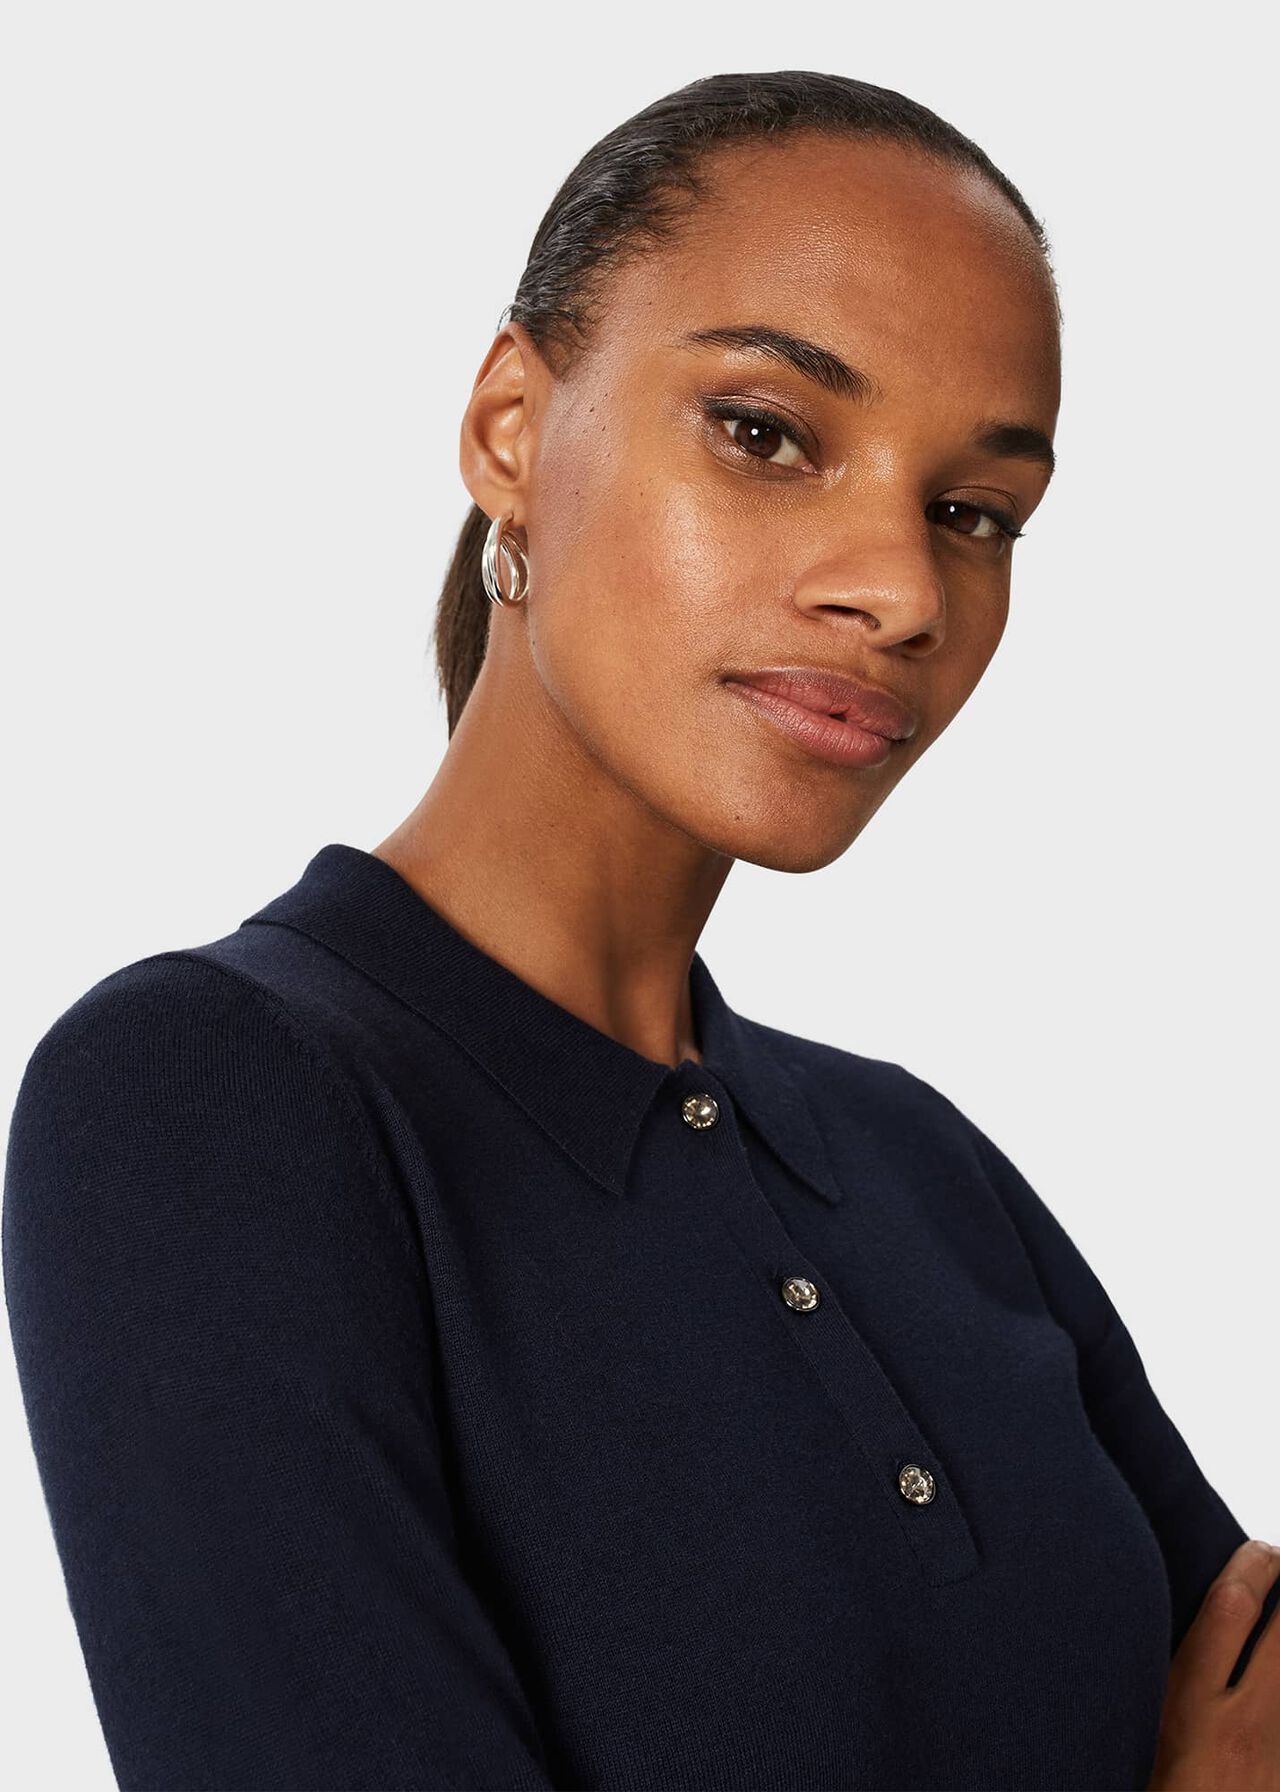 Nelle Jewelled Button Polo Jumper, Navy, hi-res